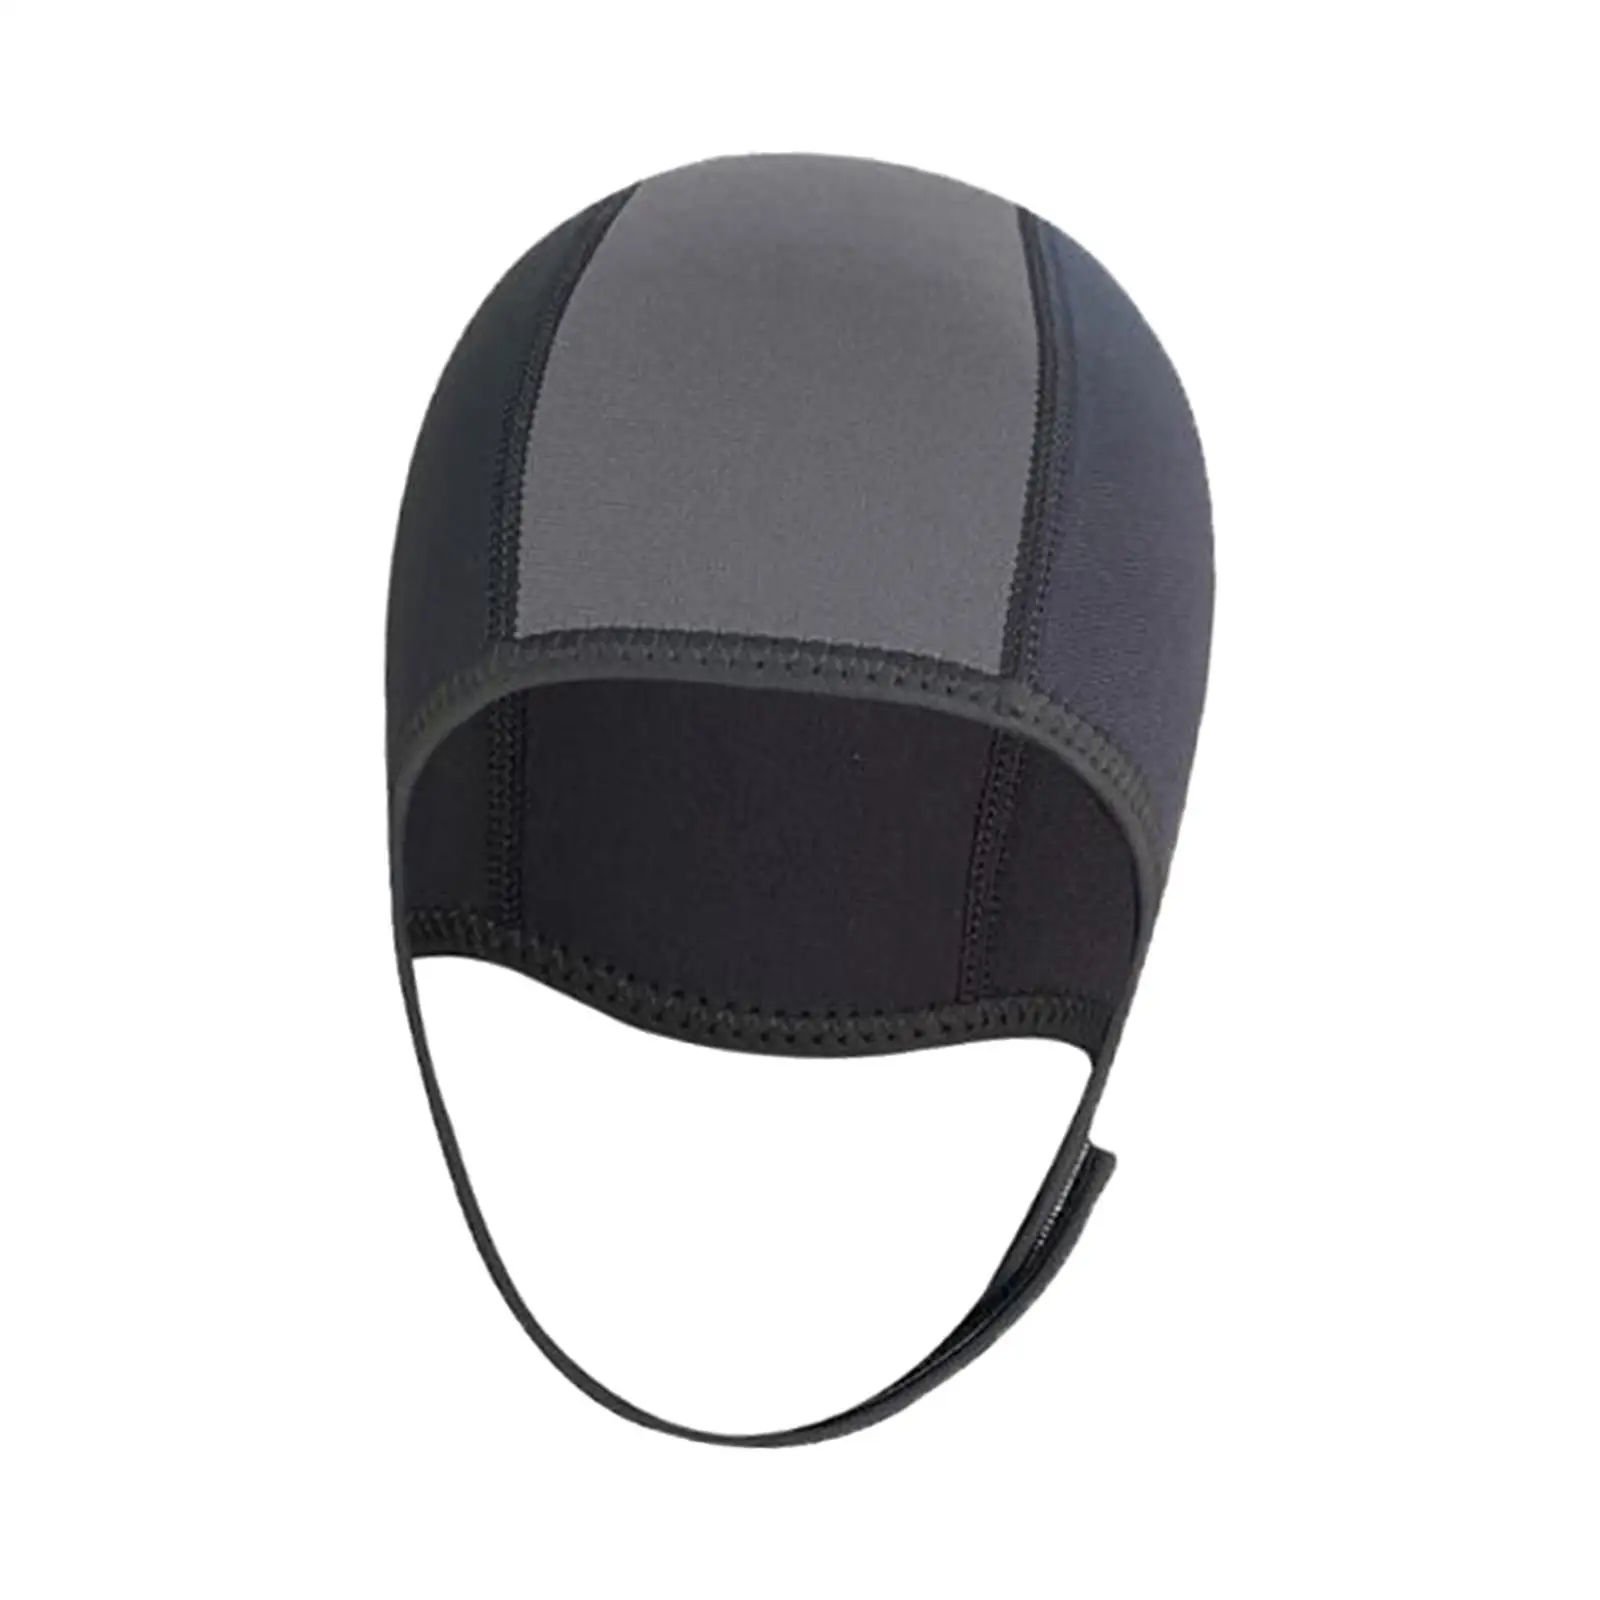 Thermal Dive Hood Adult Hat Head Protection Full Face Mask for Surfing Swimming